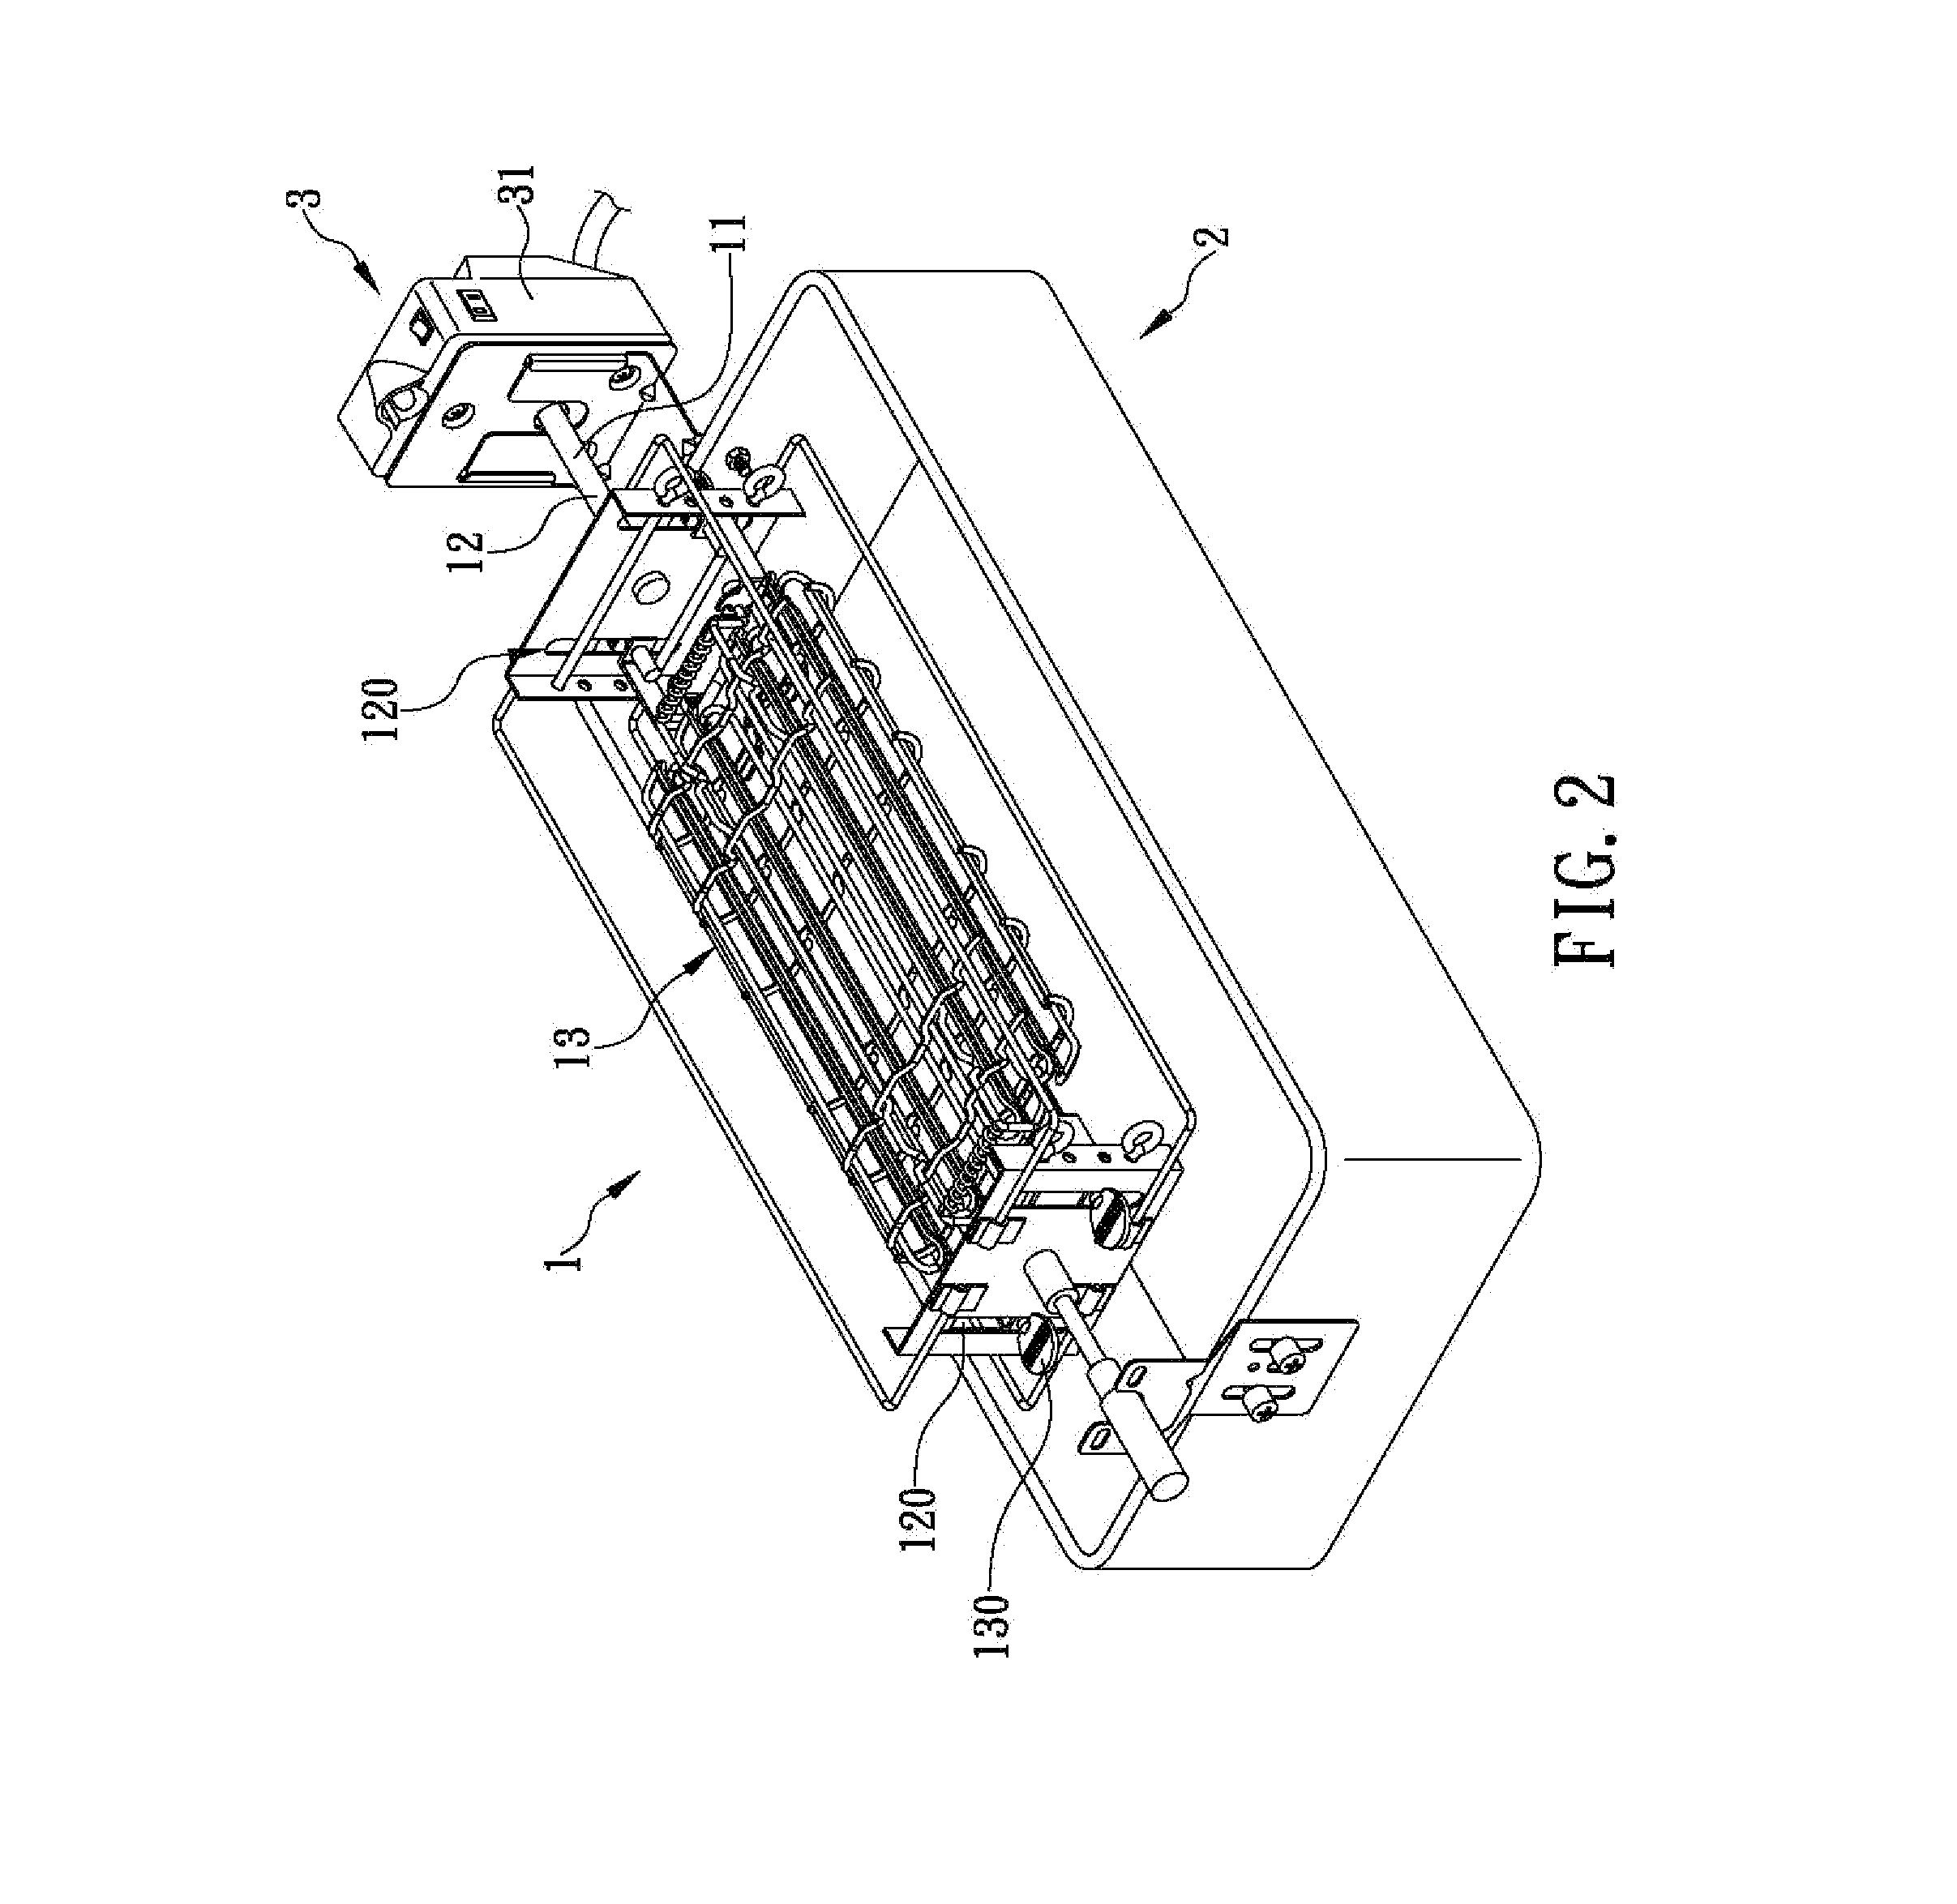 Power module capable of intermittently rotating grill rack